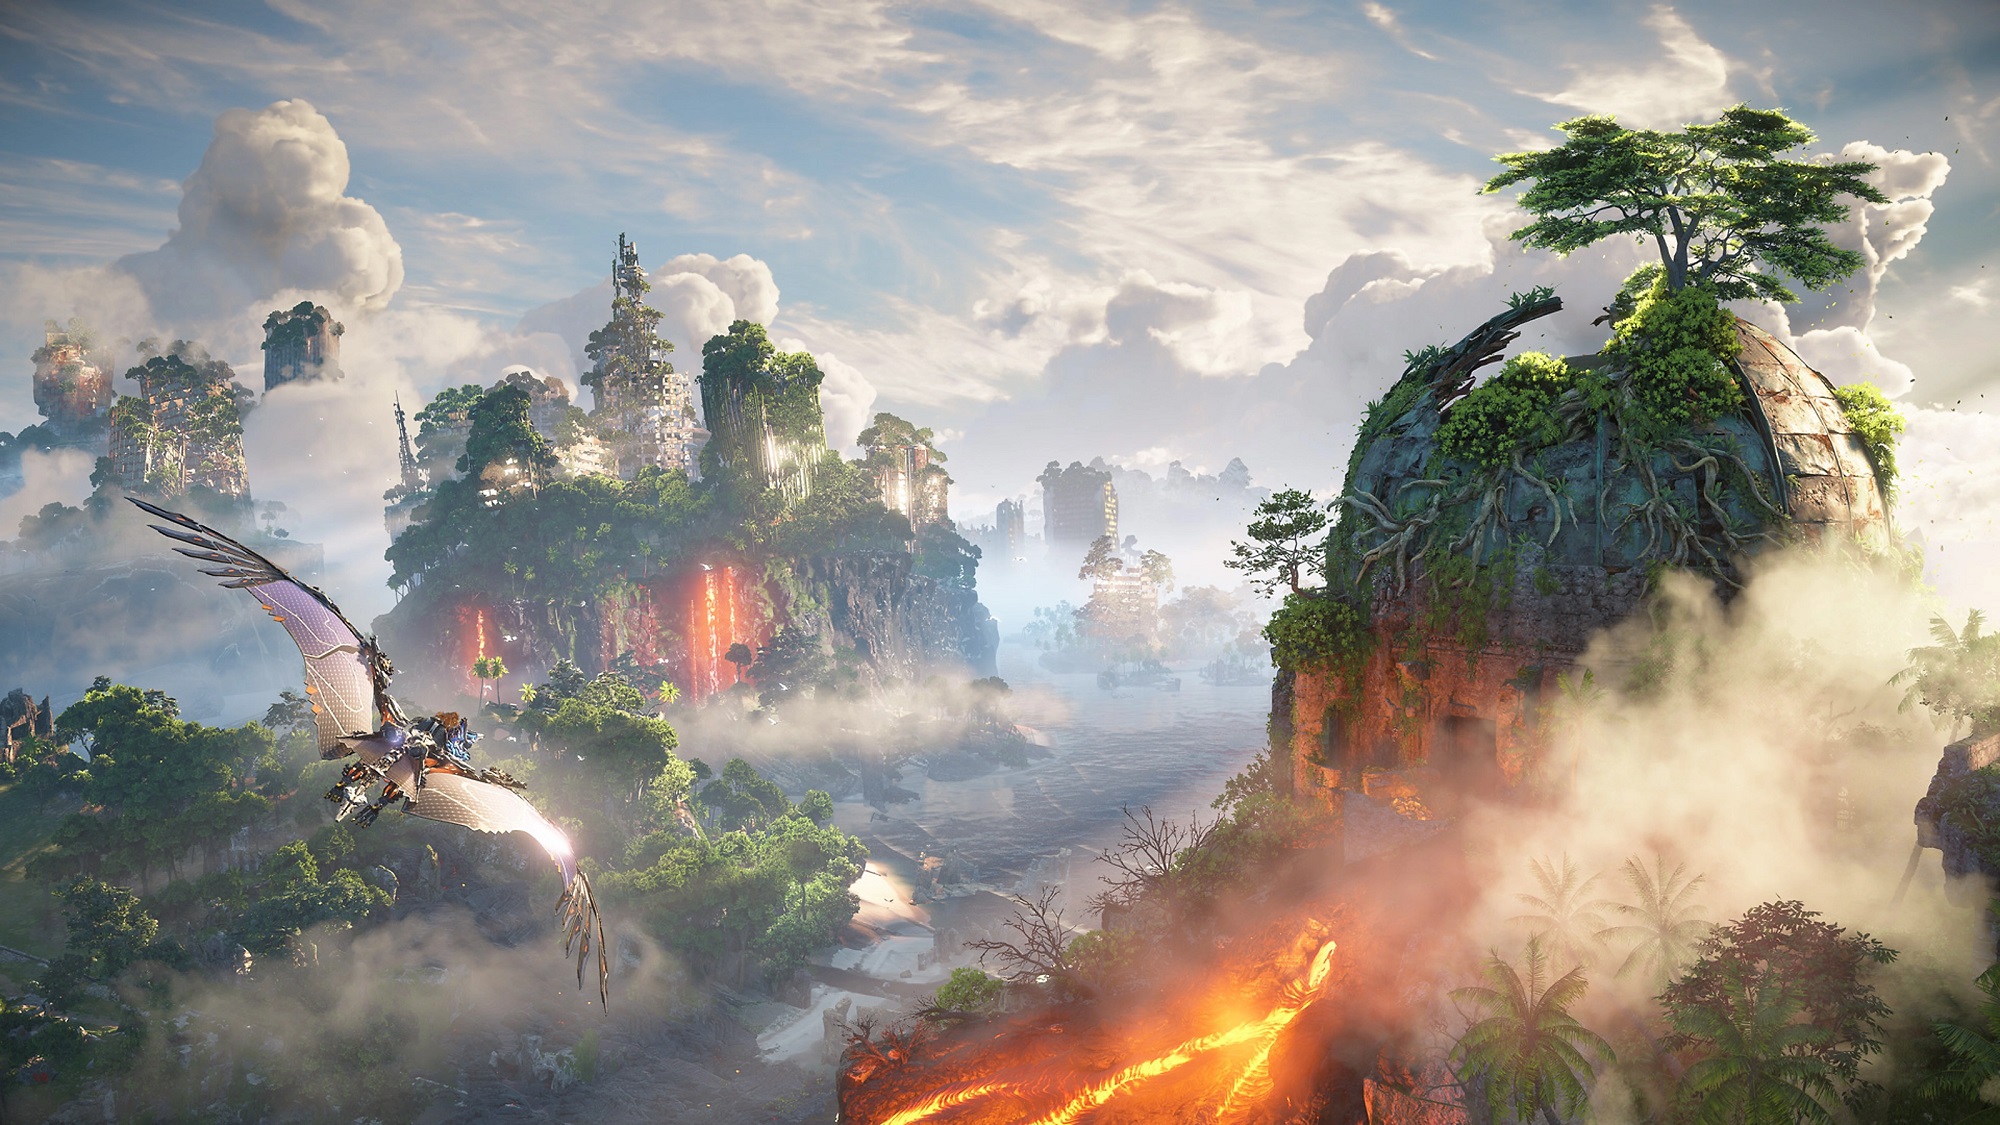 Horizon Forbidden West Complete Edition' Reportedly Set For PC And